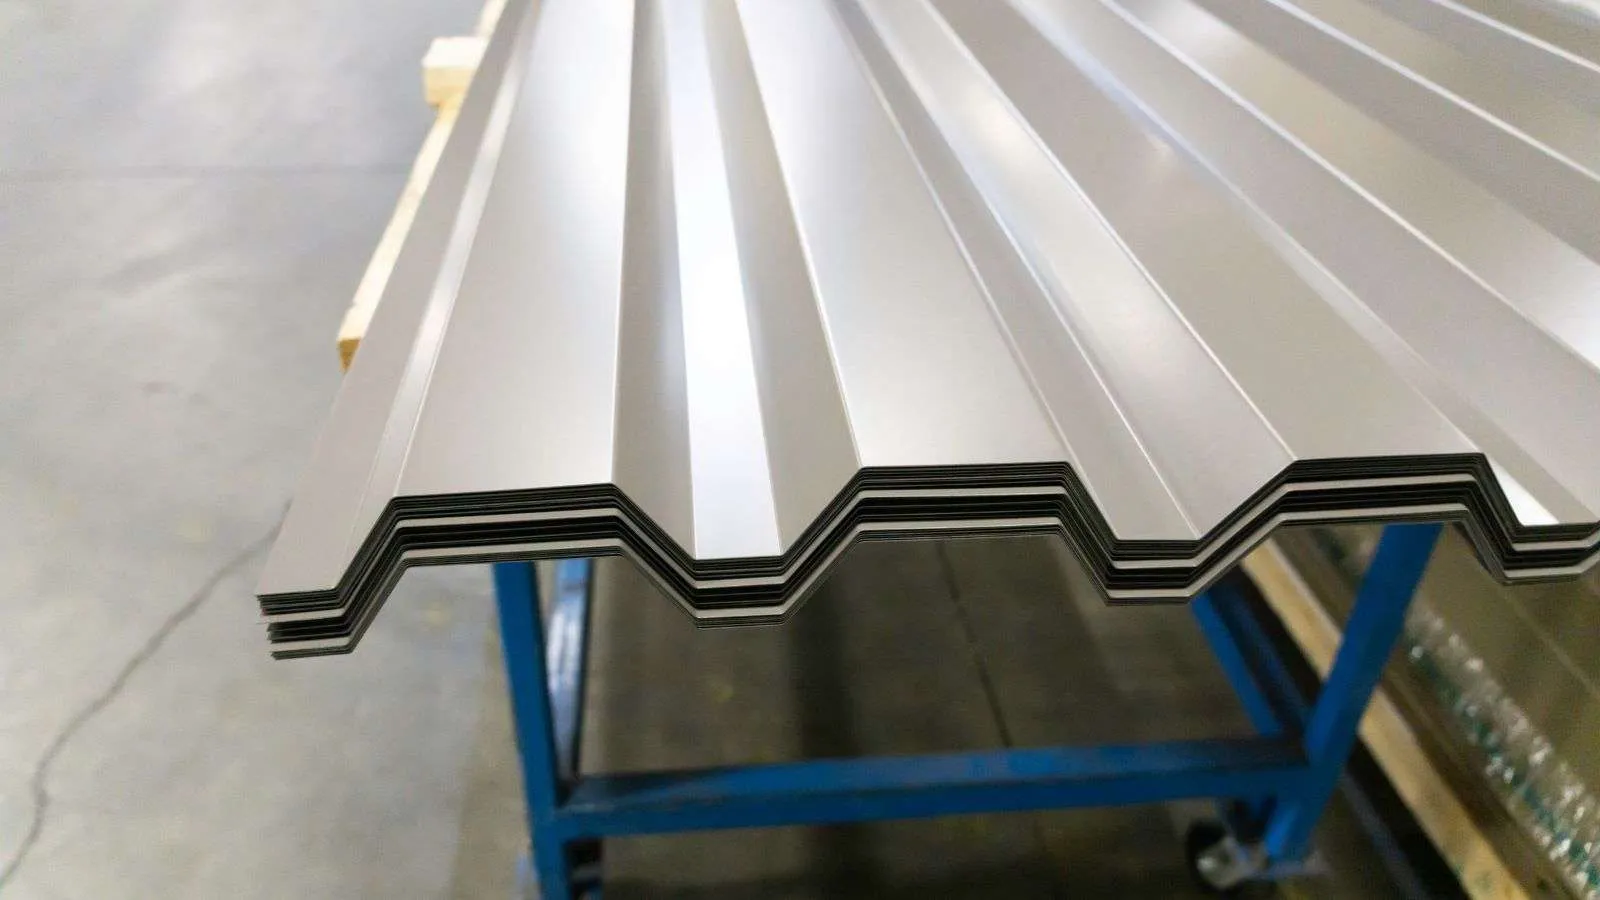 Aluminum roofing panels for sale - bighomeprojects.com